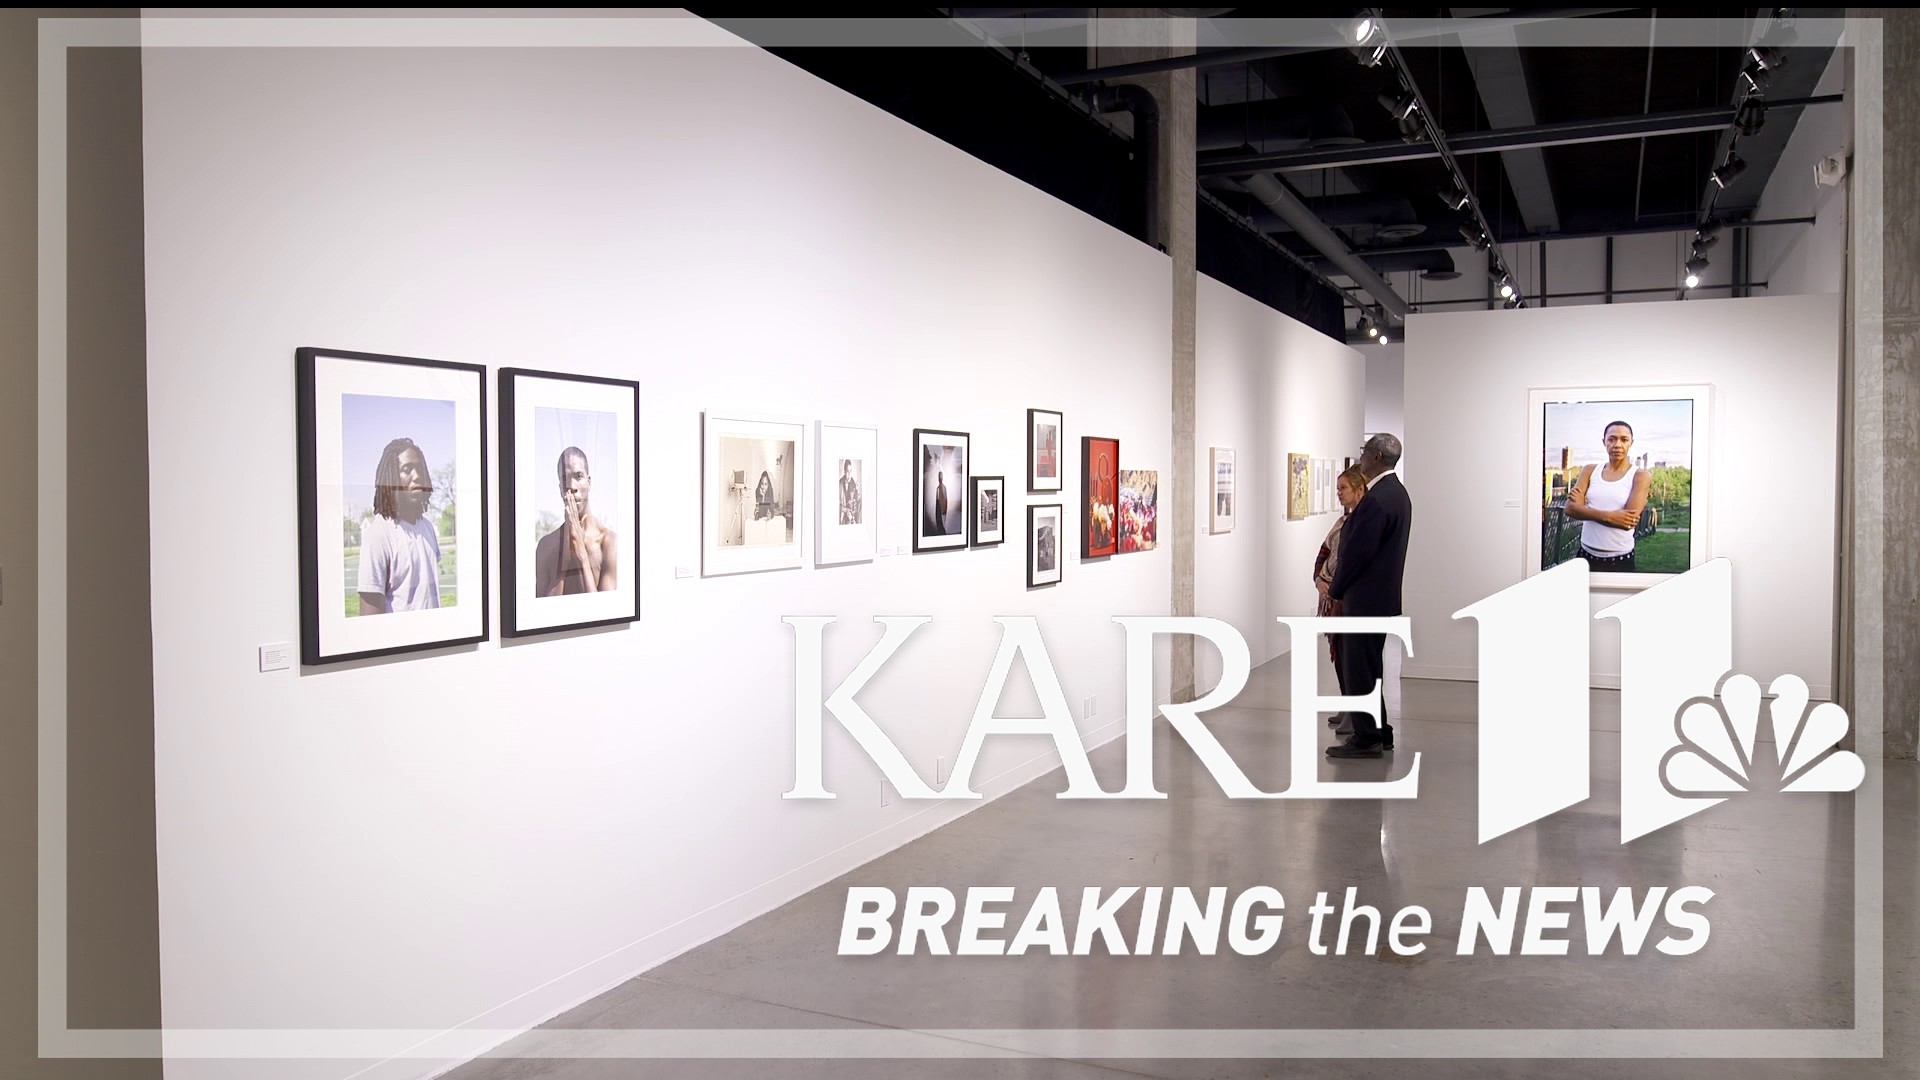 “A Picture Gallery of the Soul” at the Katherine E. Nash Gallery opened back in September and is believed to represent a cultural milestone.